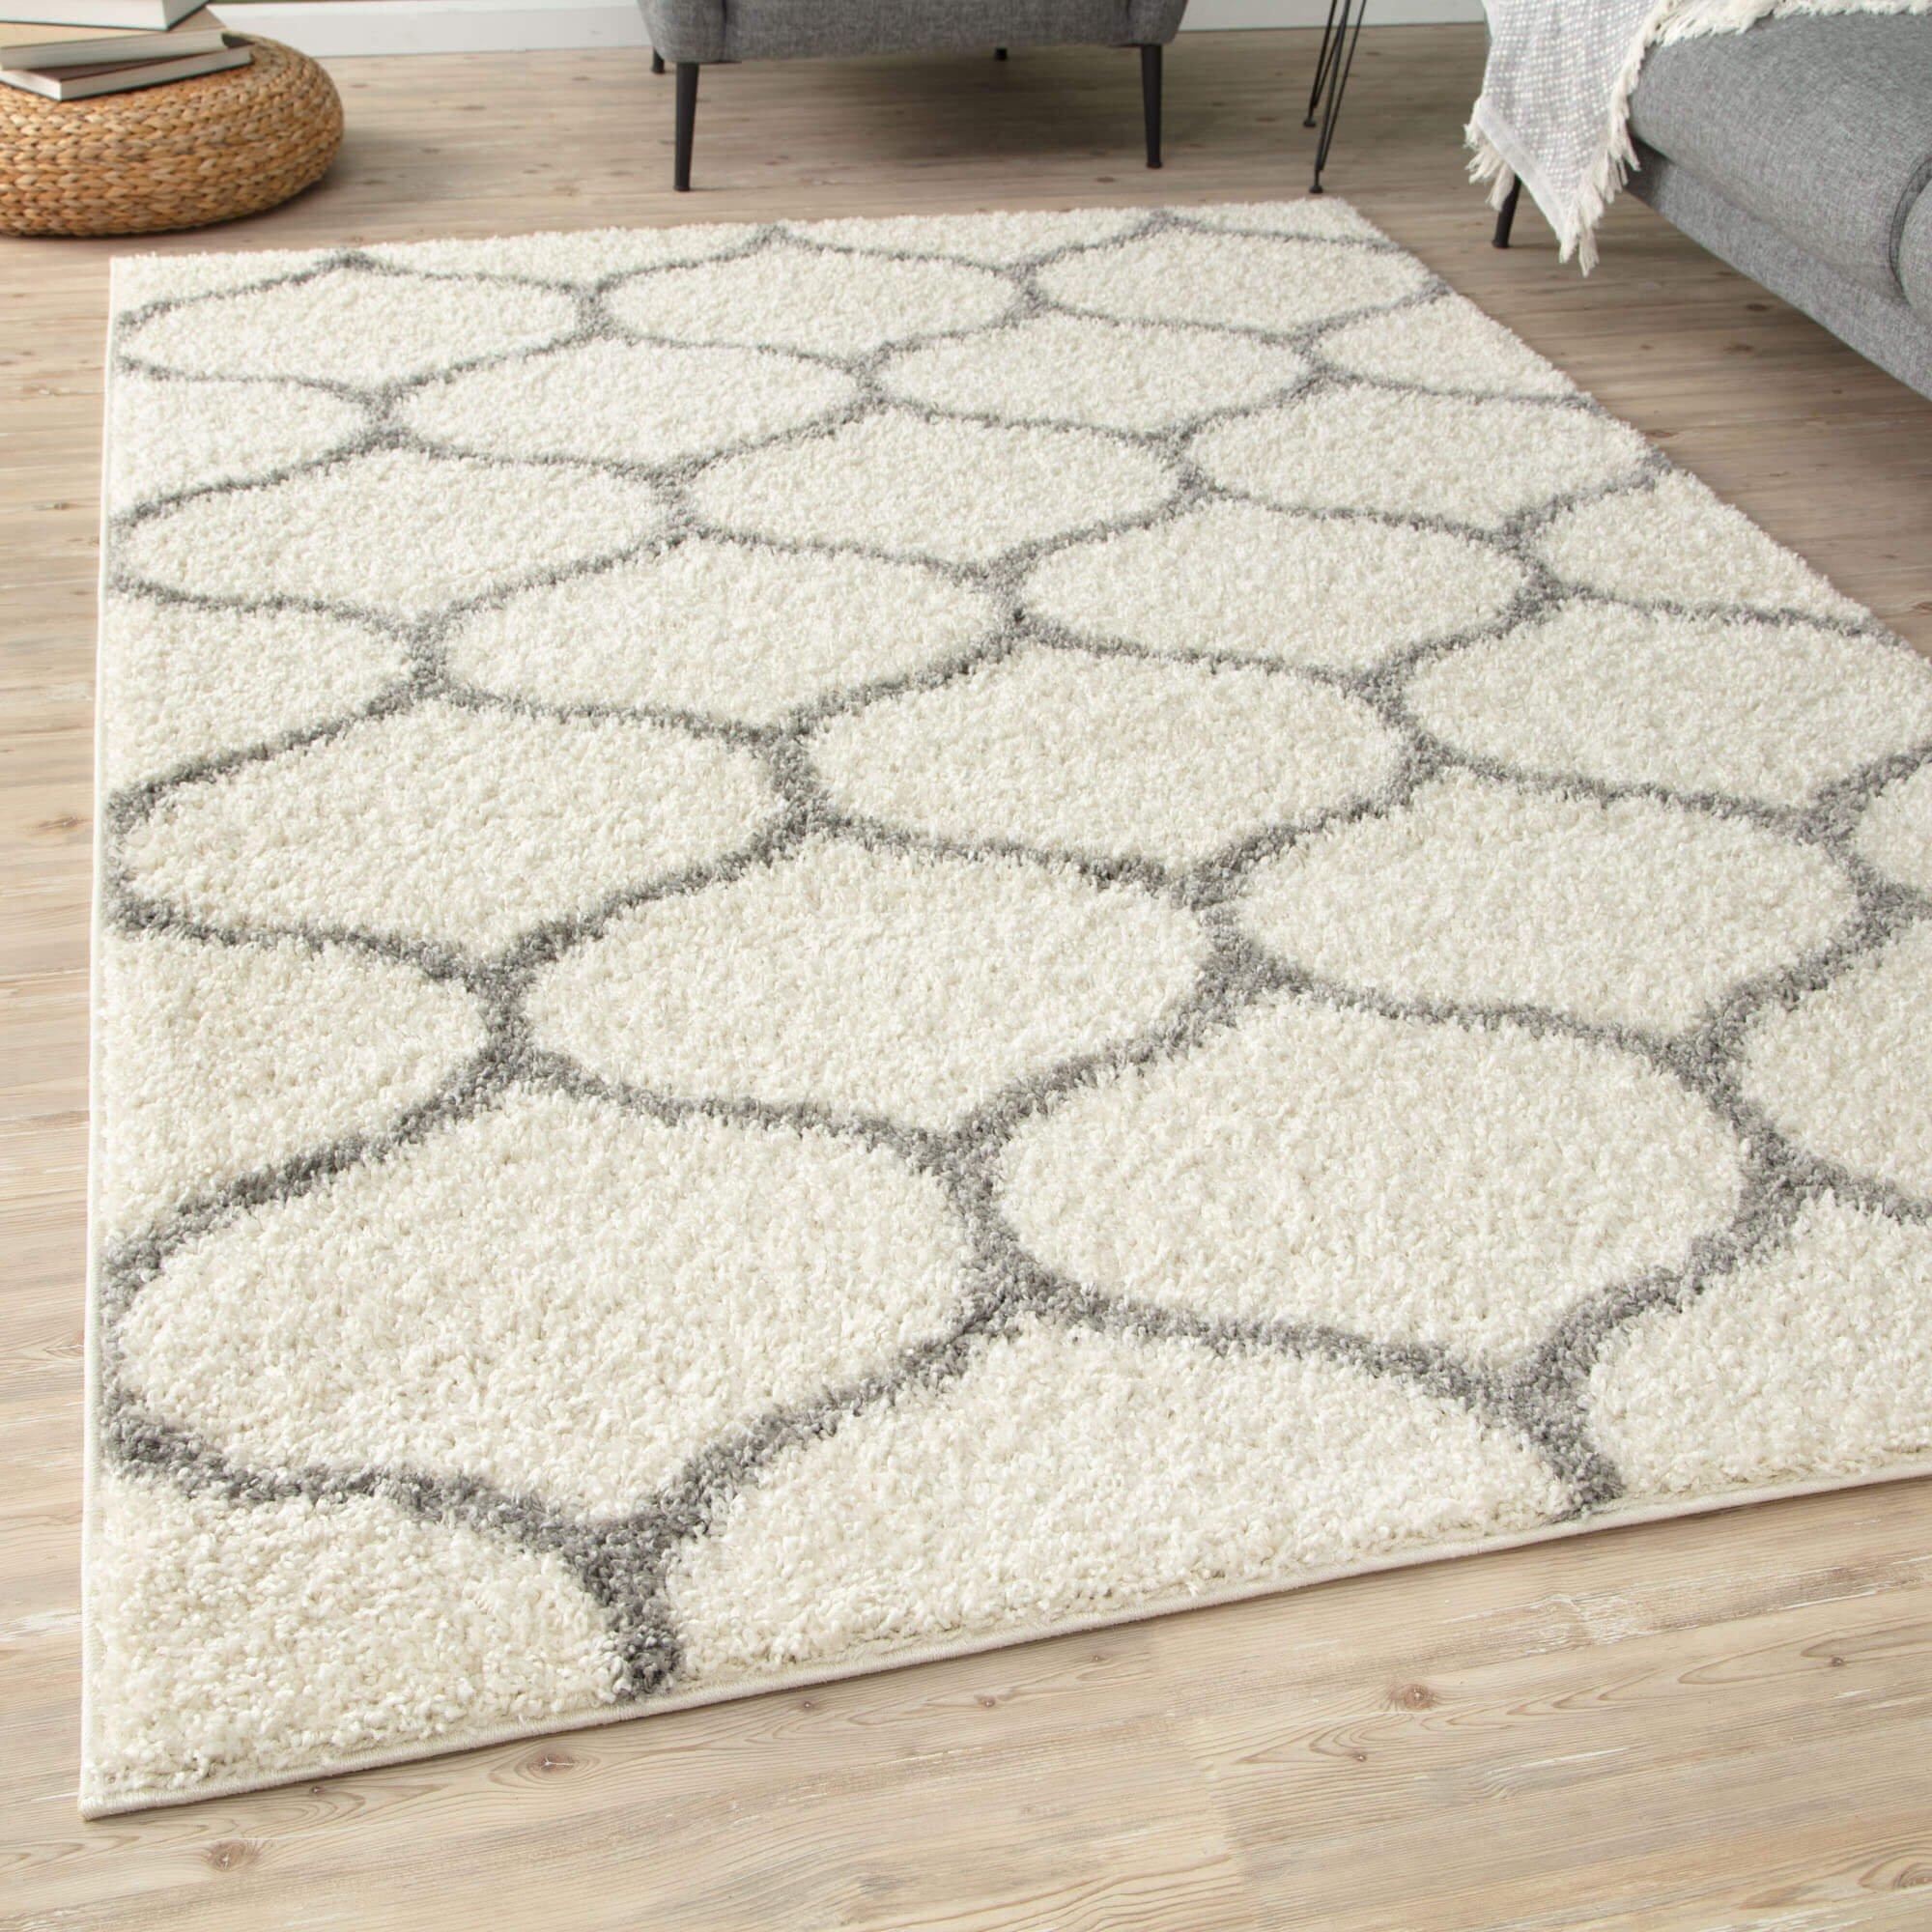 Myshaggy Collection Rugs Trellis Design in Ivory- 384 IG